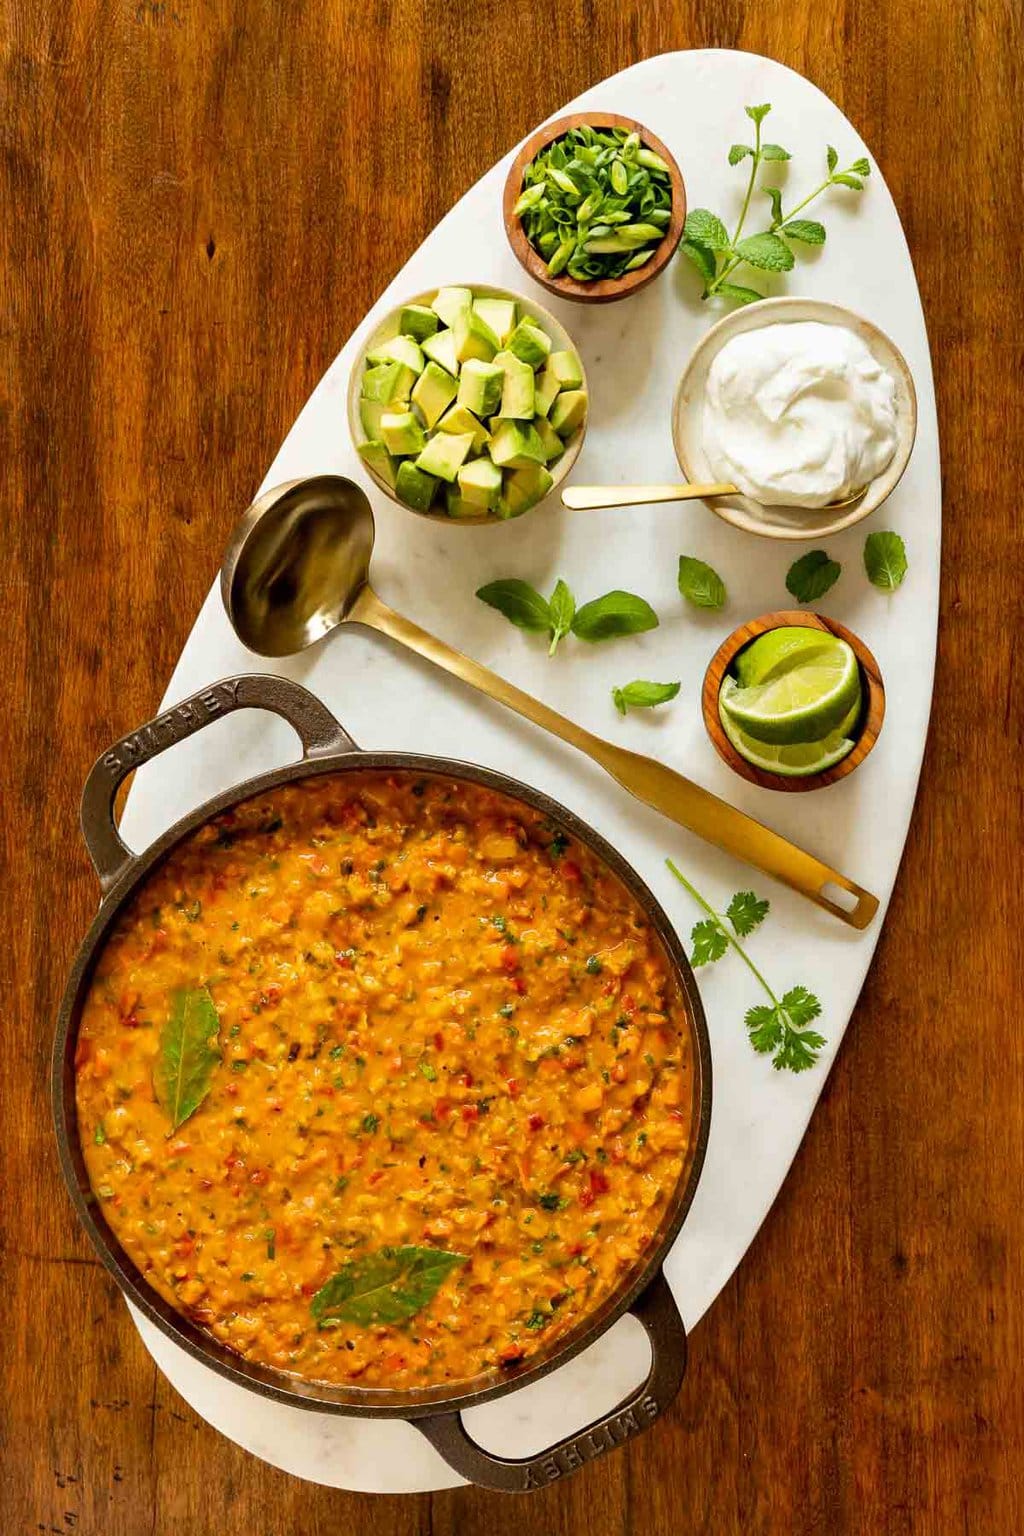 Vertical overhead photo of a cast iron pot of Curried Red Lentil Coconut Soup with small bowls of diced avocados, lime wedges, sliced green onions and fresh basil and cilantro leaves.